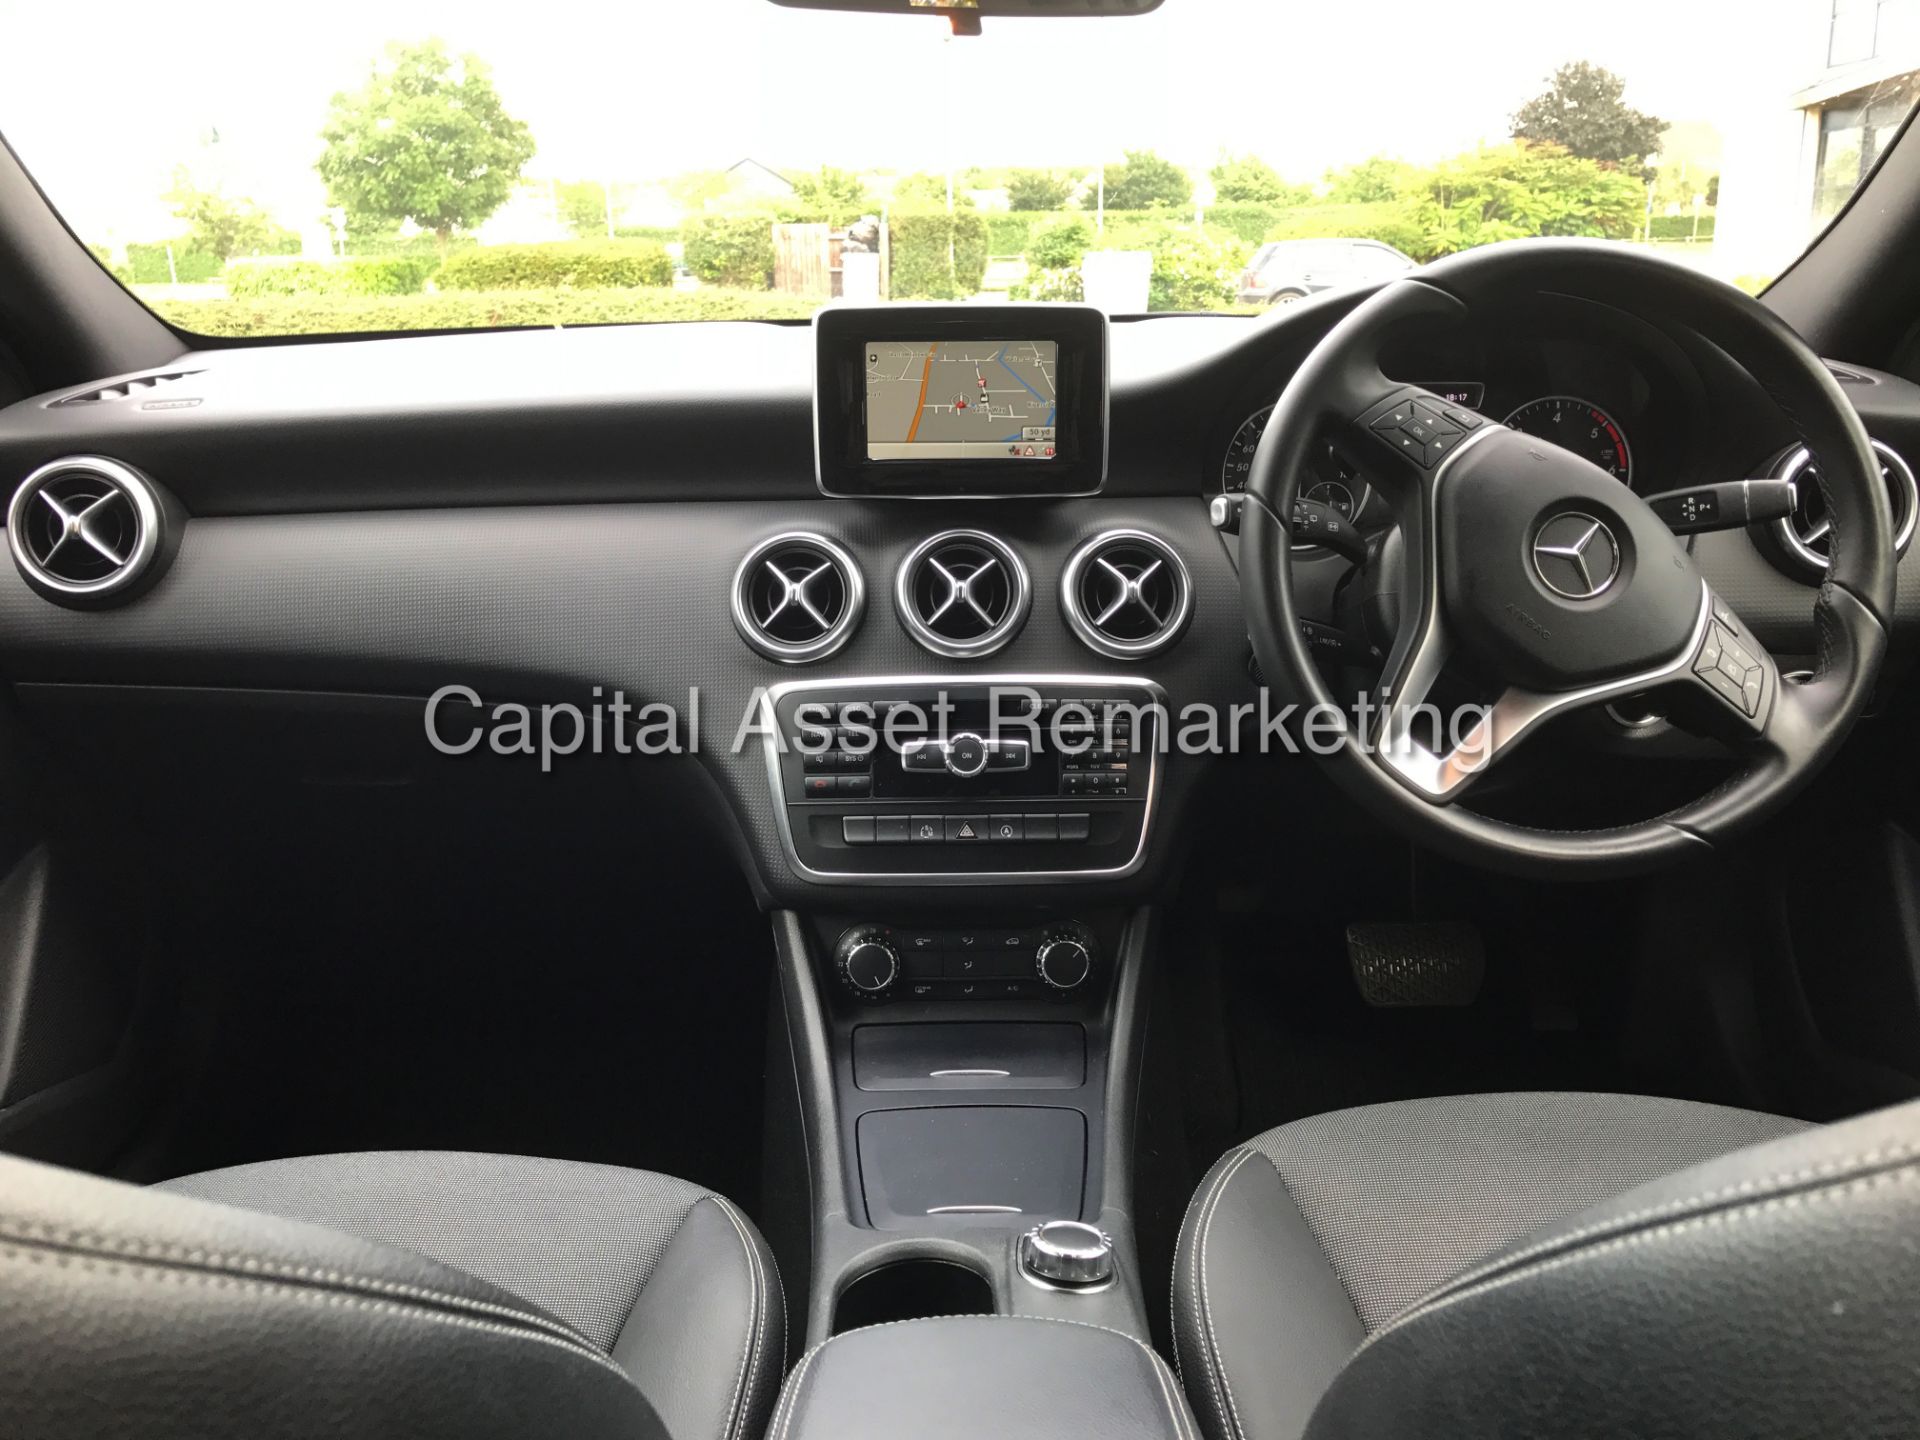 (ON SALE) MERCEDES A180d 7G TRONIC "15 REG" SAT NAV - 1 OWNER - PADDEL SHIFT - CRUISE - AIR CON - Image 12 of 22